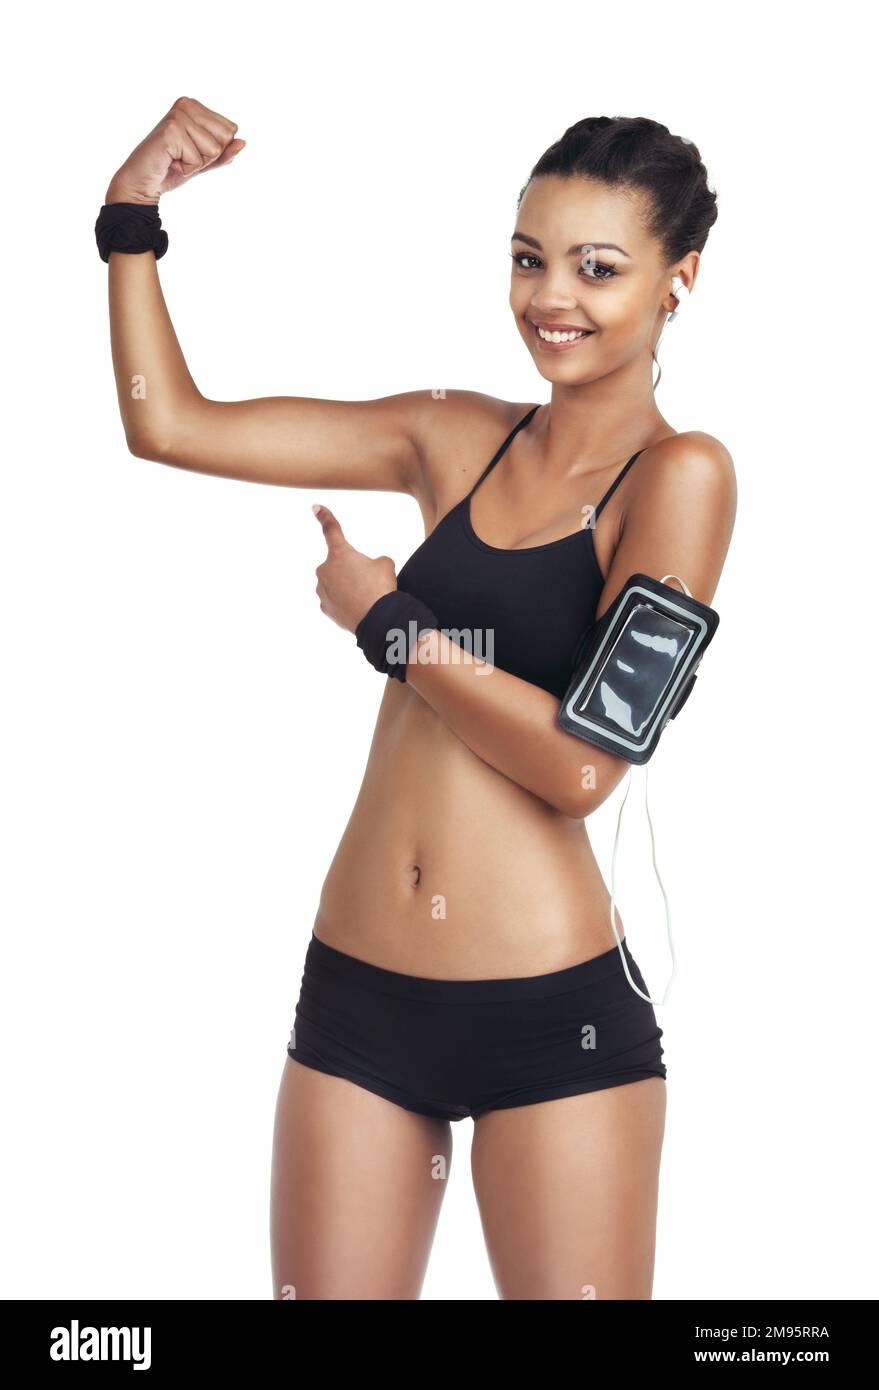 https://c8.alamy.com/comp/2M95RRA/portrait-strong-arm-and-black-woman-point-at-bodybuilder-training-fitness-workout-and-health-exercise-results-girl-listening-to-music-radio-2M95RRA.jpg